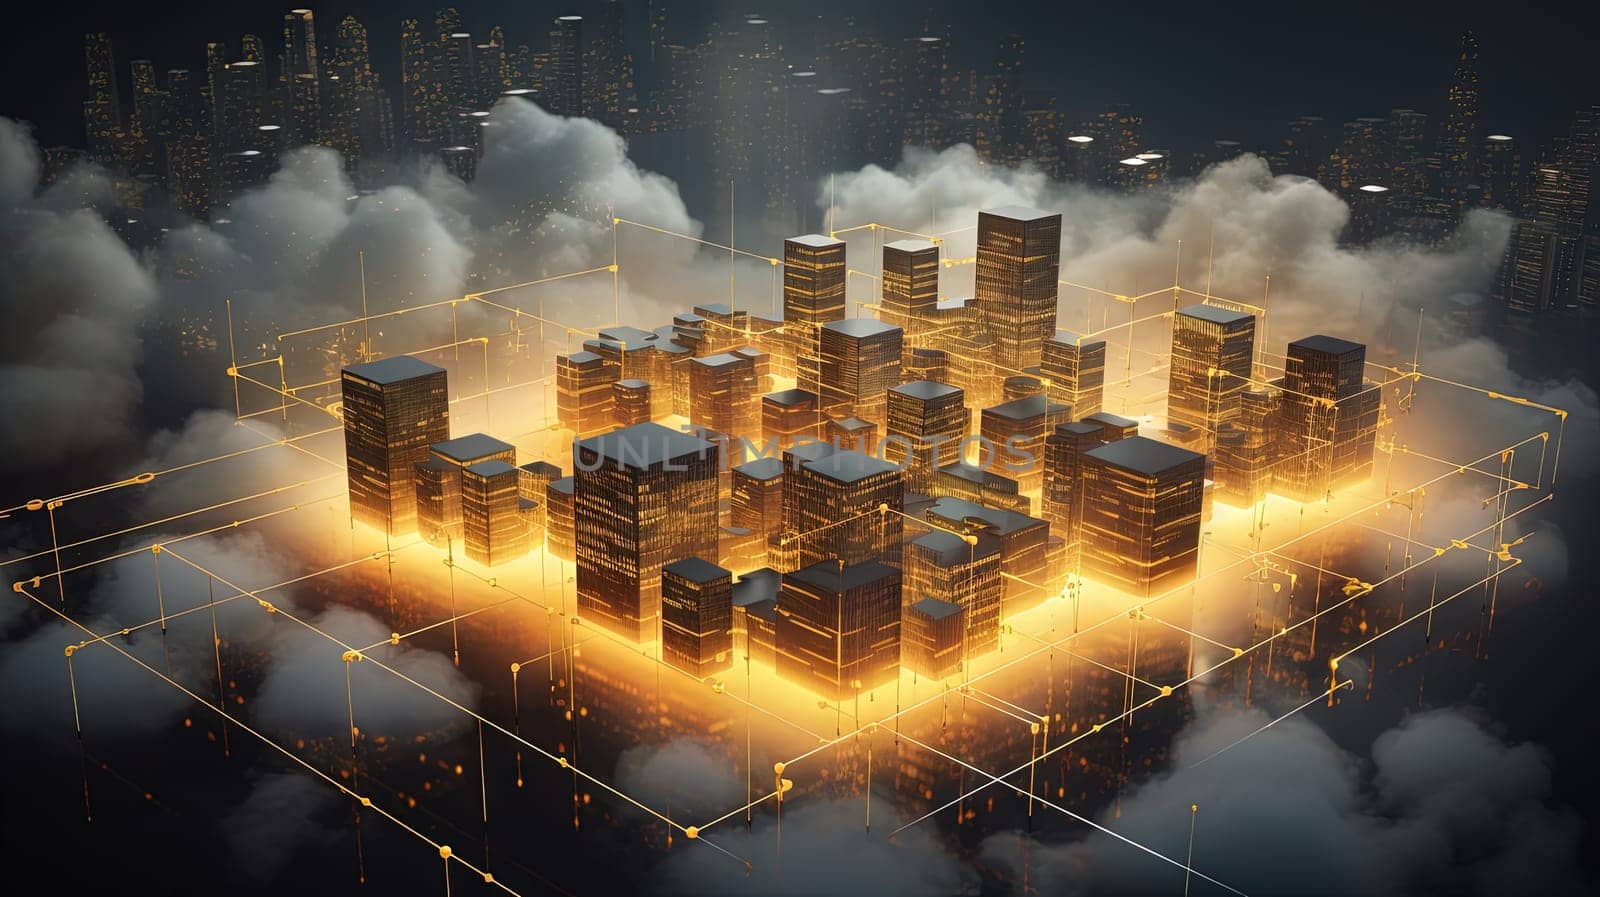 Concept of a digital city with cloud connections. Futuristic network in the clouds. Generated AI. by SwillKch